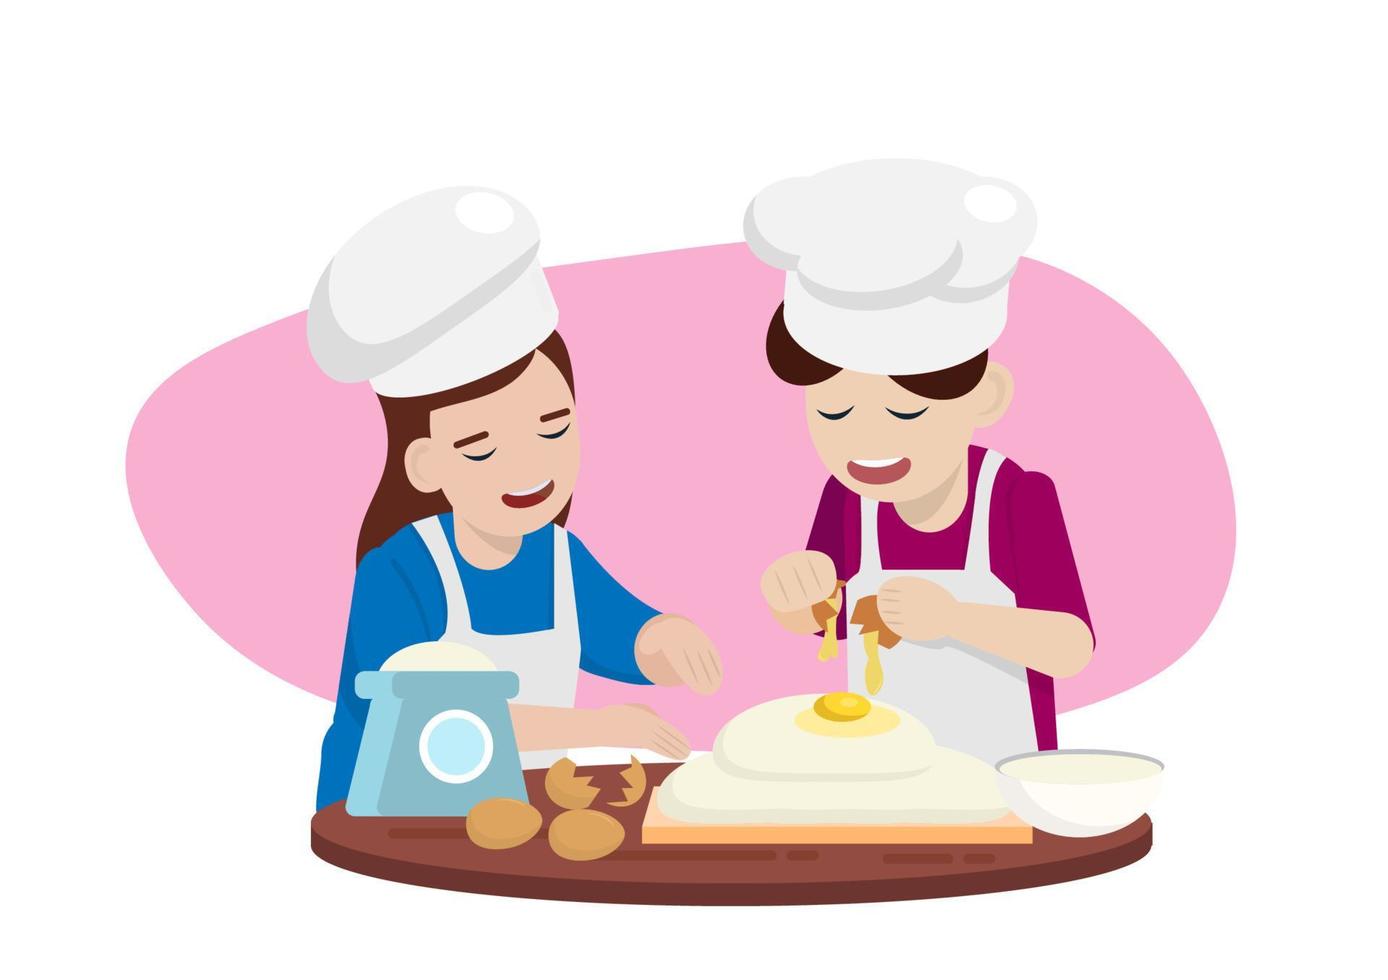 Smiles of men and women Who are making a cake.Have fun baking, cooking or baking. Lovely couples are enjoying their hobbies together. Cartoon flat colorful vector picture